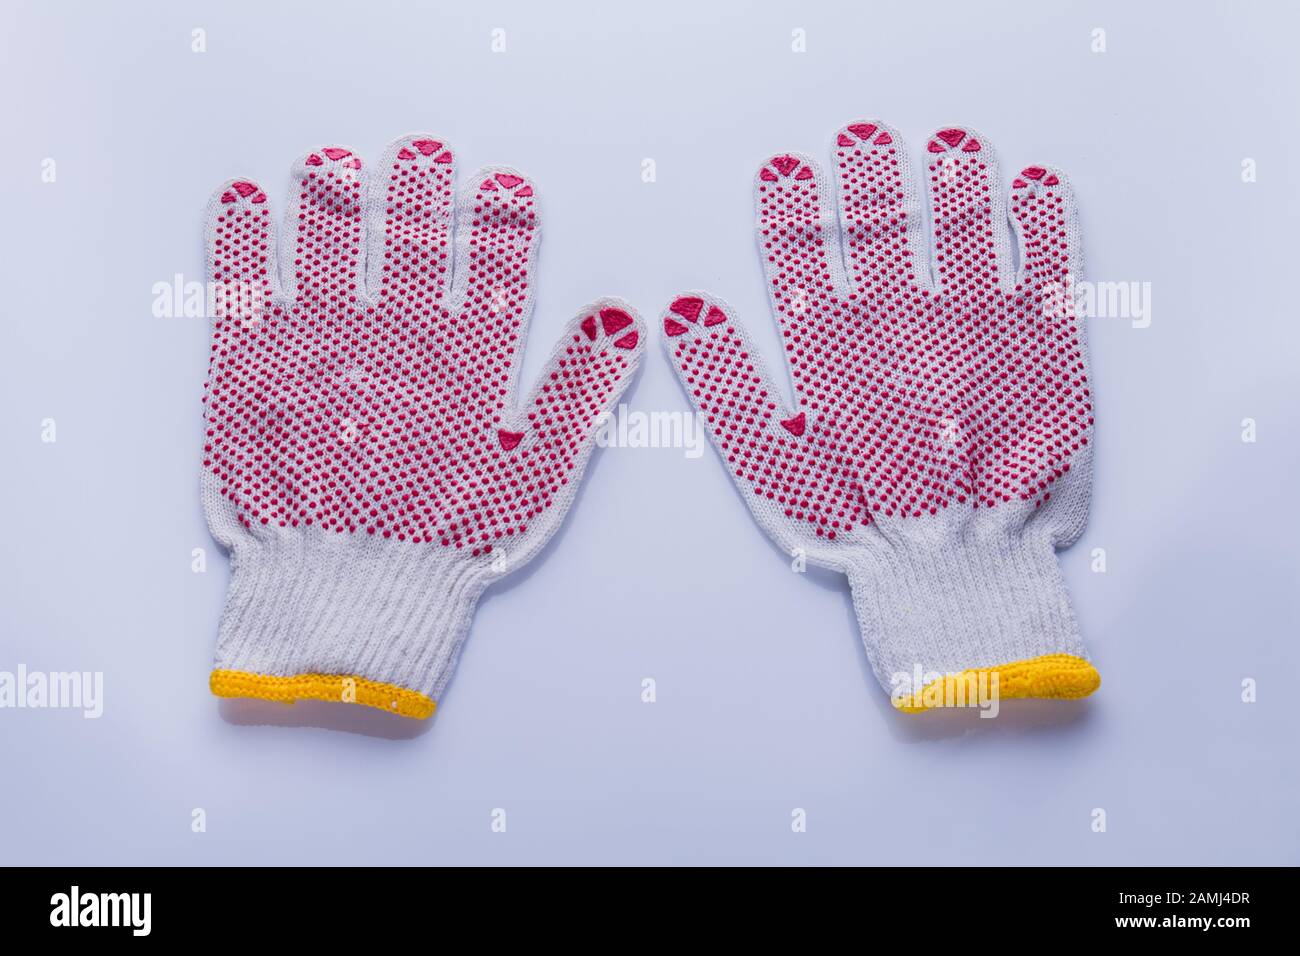 https://c8.alamy.com/comp/2AMJ4DR/pair-of-protective-working-cotton-gloves-with-red-rubber-dots-2AMJ4DR.jpg